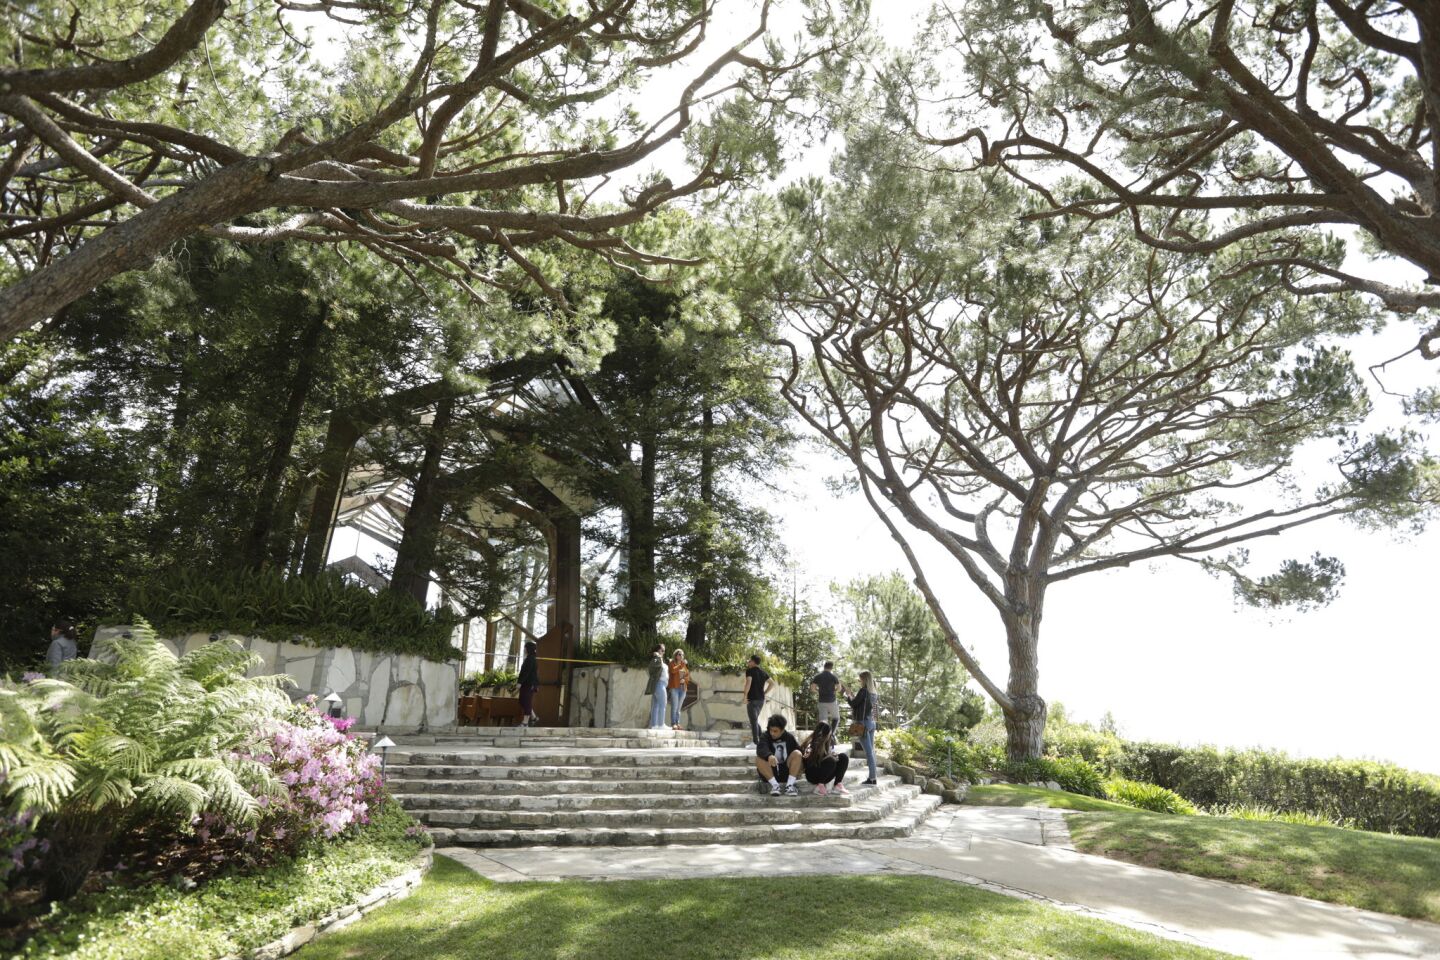 The grounds and entryway to Wayfarers Chapel in Rancho Palos Verdes.